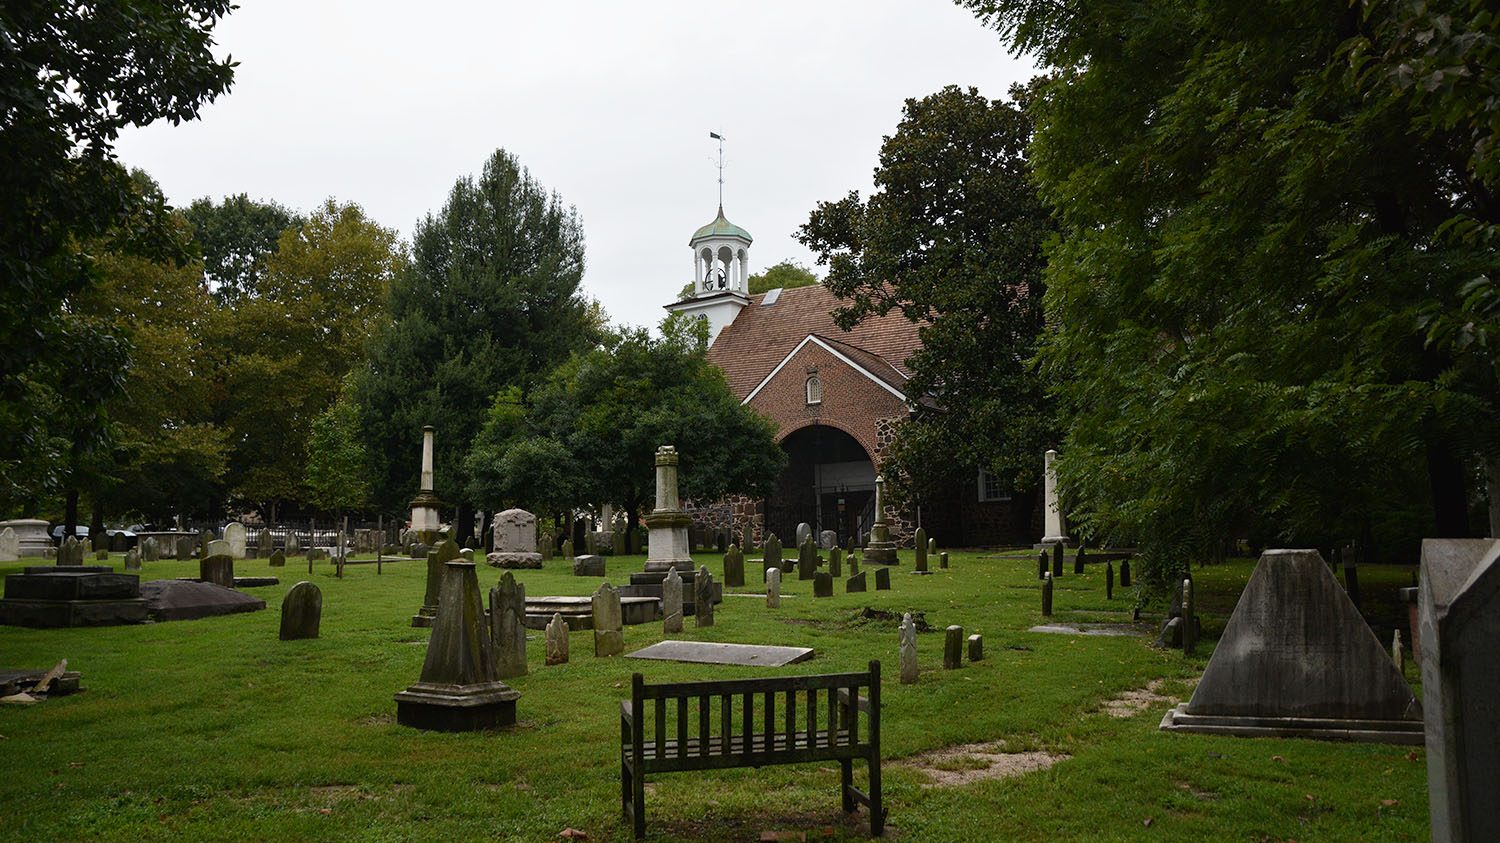 Old Swedes Church viewed from a distance, with many graves in the foreground.